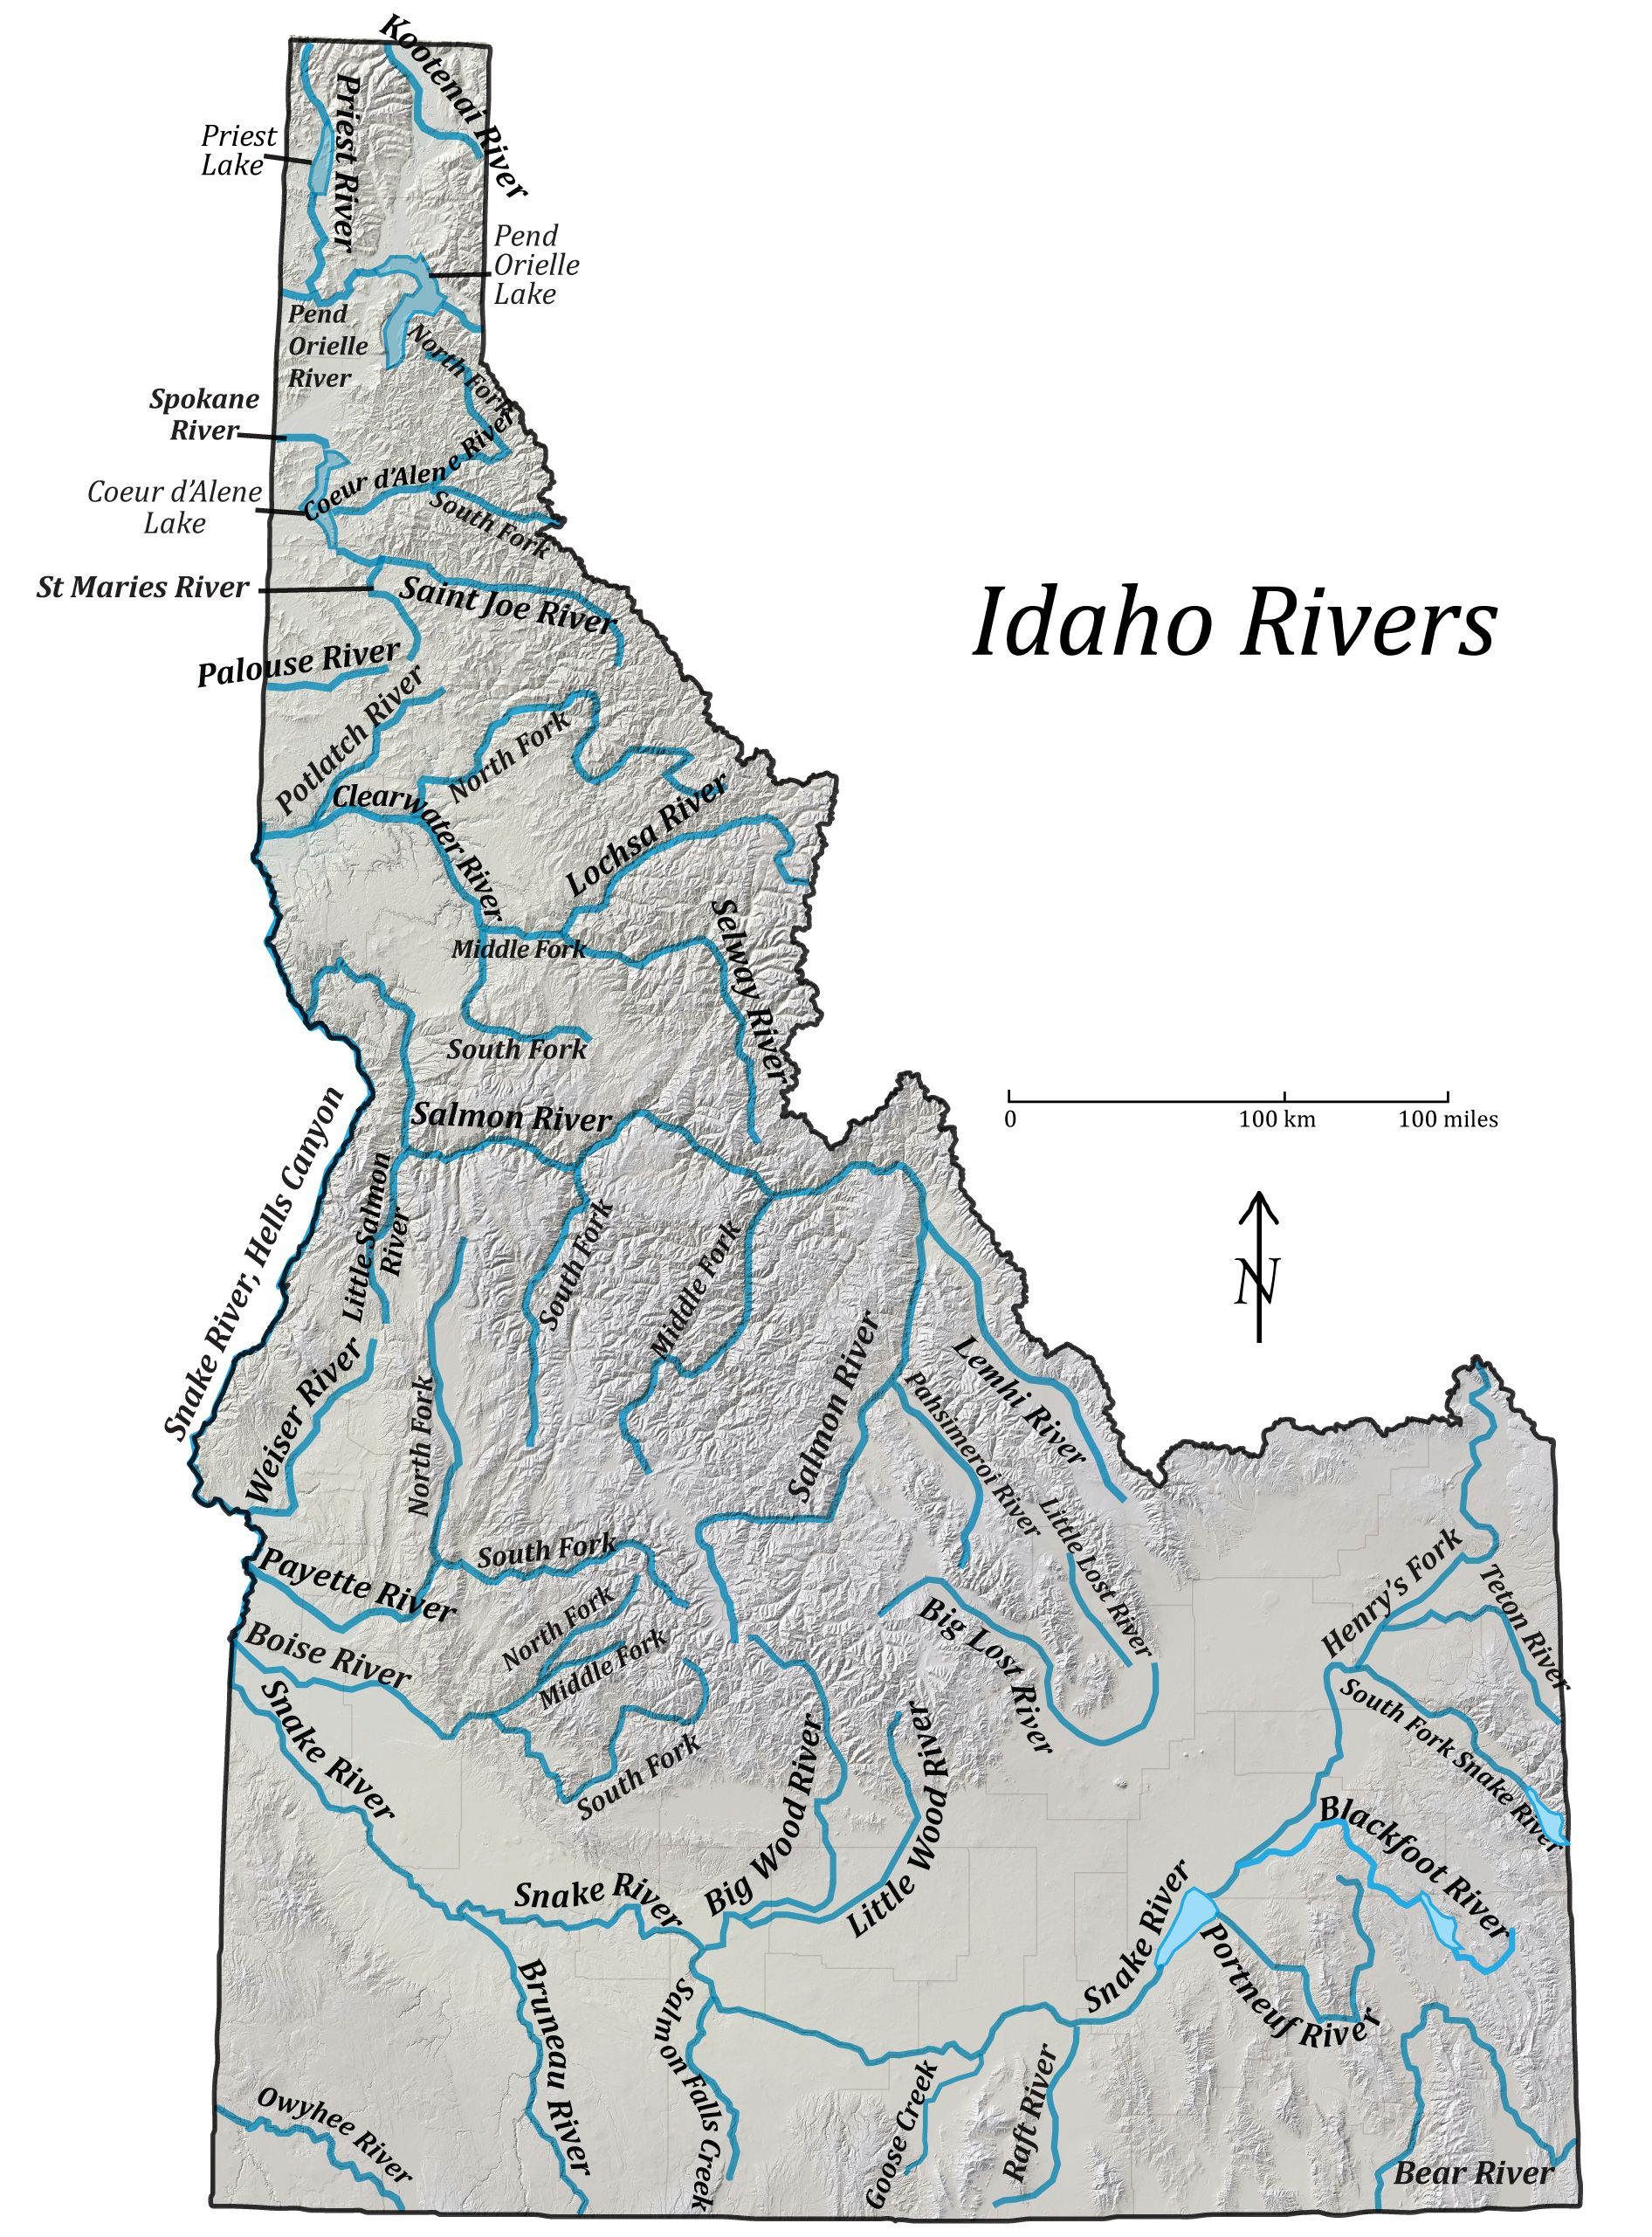 Shaded relief map showing Idaho rivers